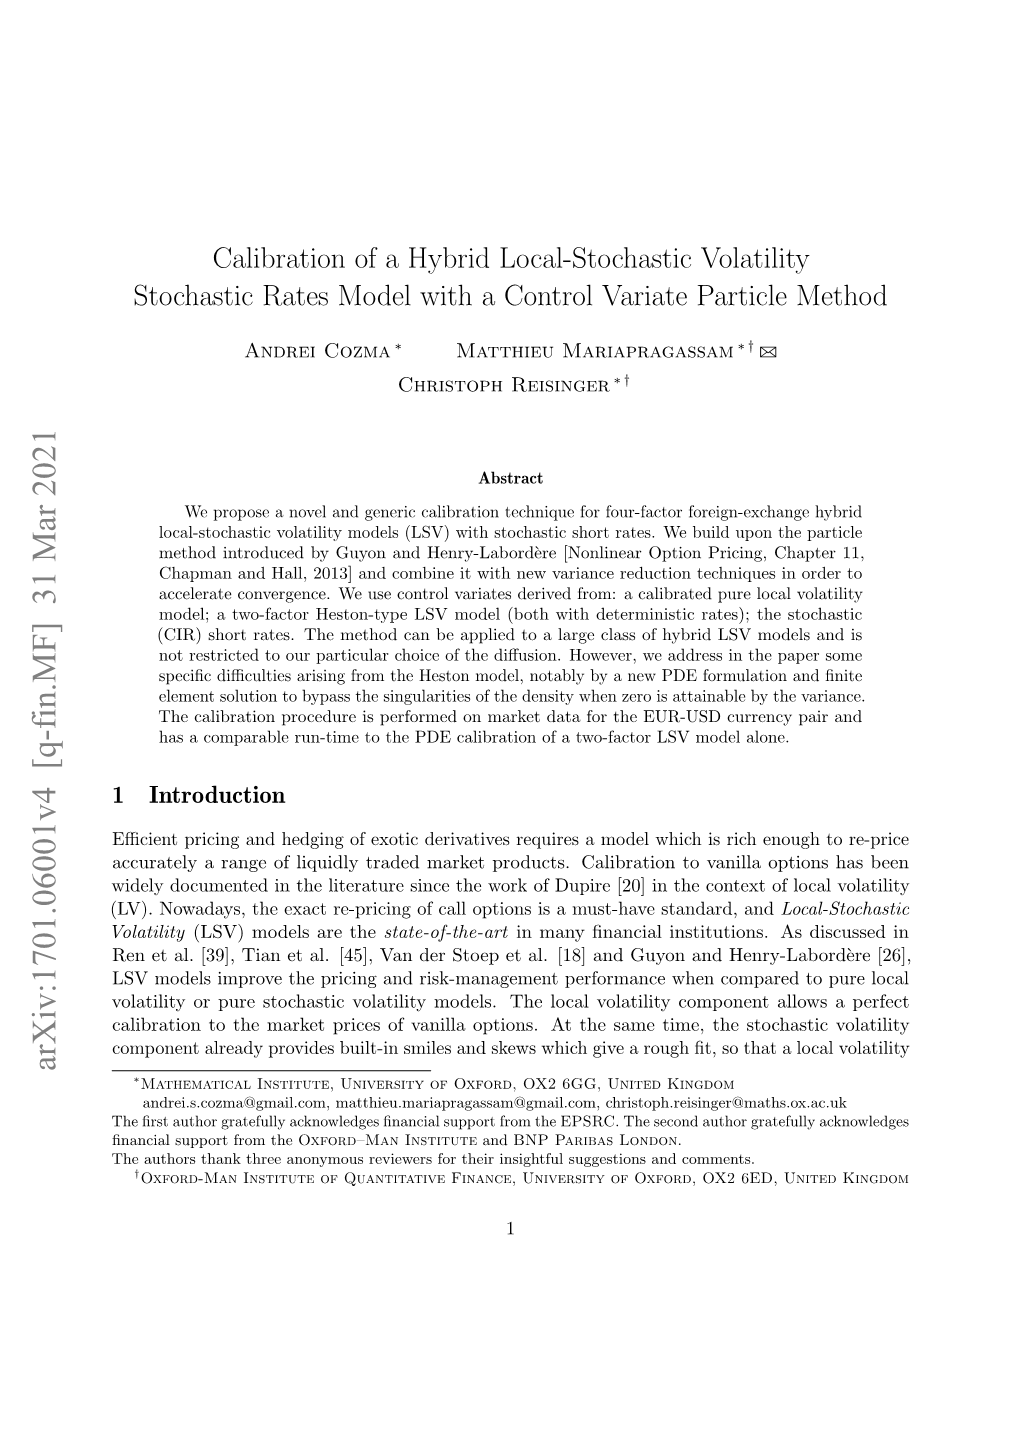 Calibration of a Hybrid Local-Stochastic Volatility Stochastic Rates Model with a Control Variate Particle Method